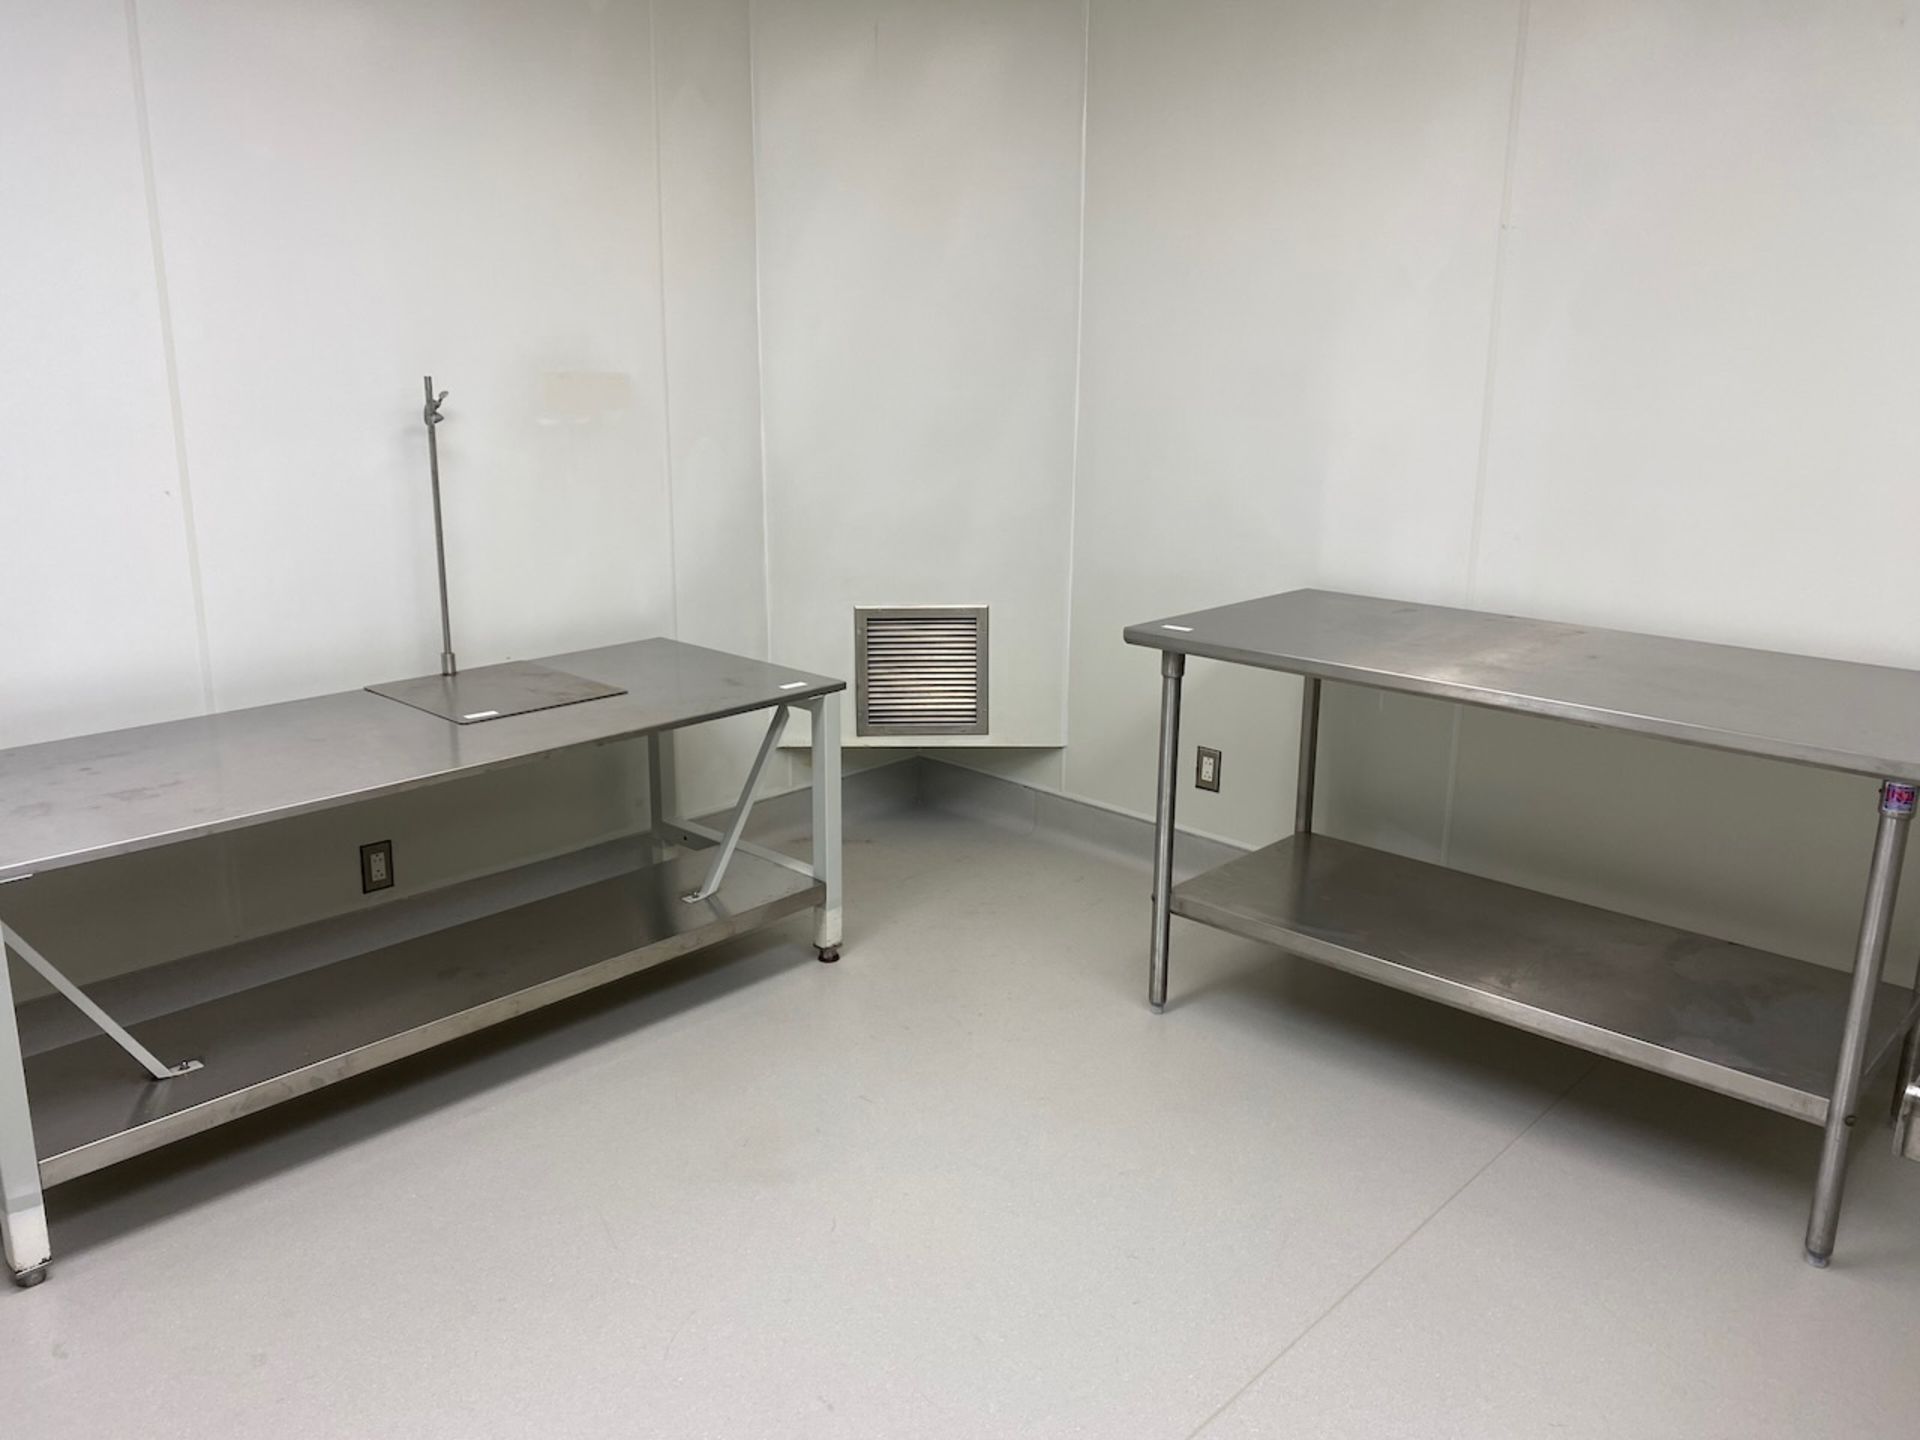 Lot of two stainless steel tables